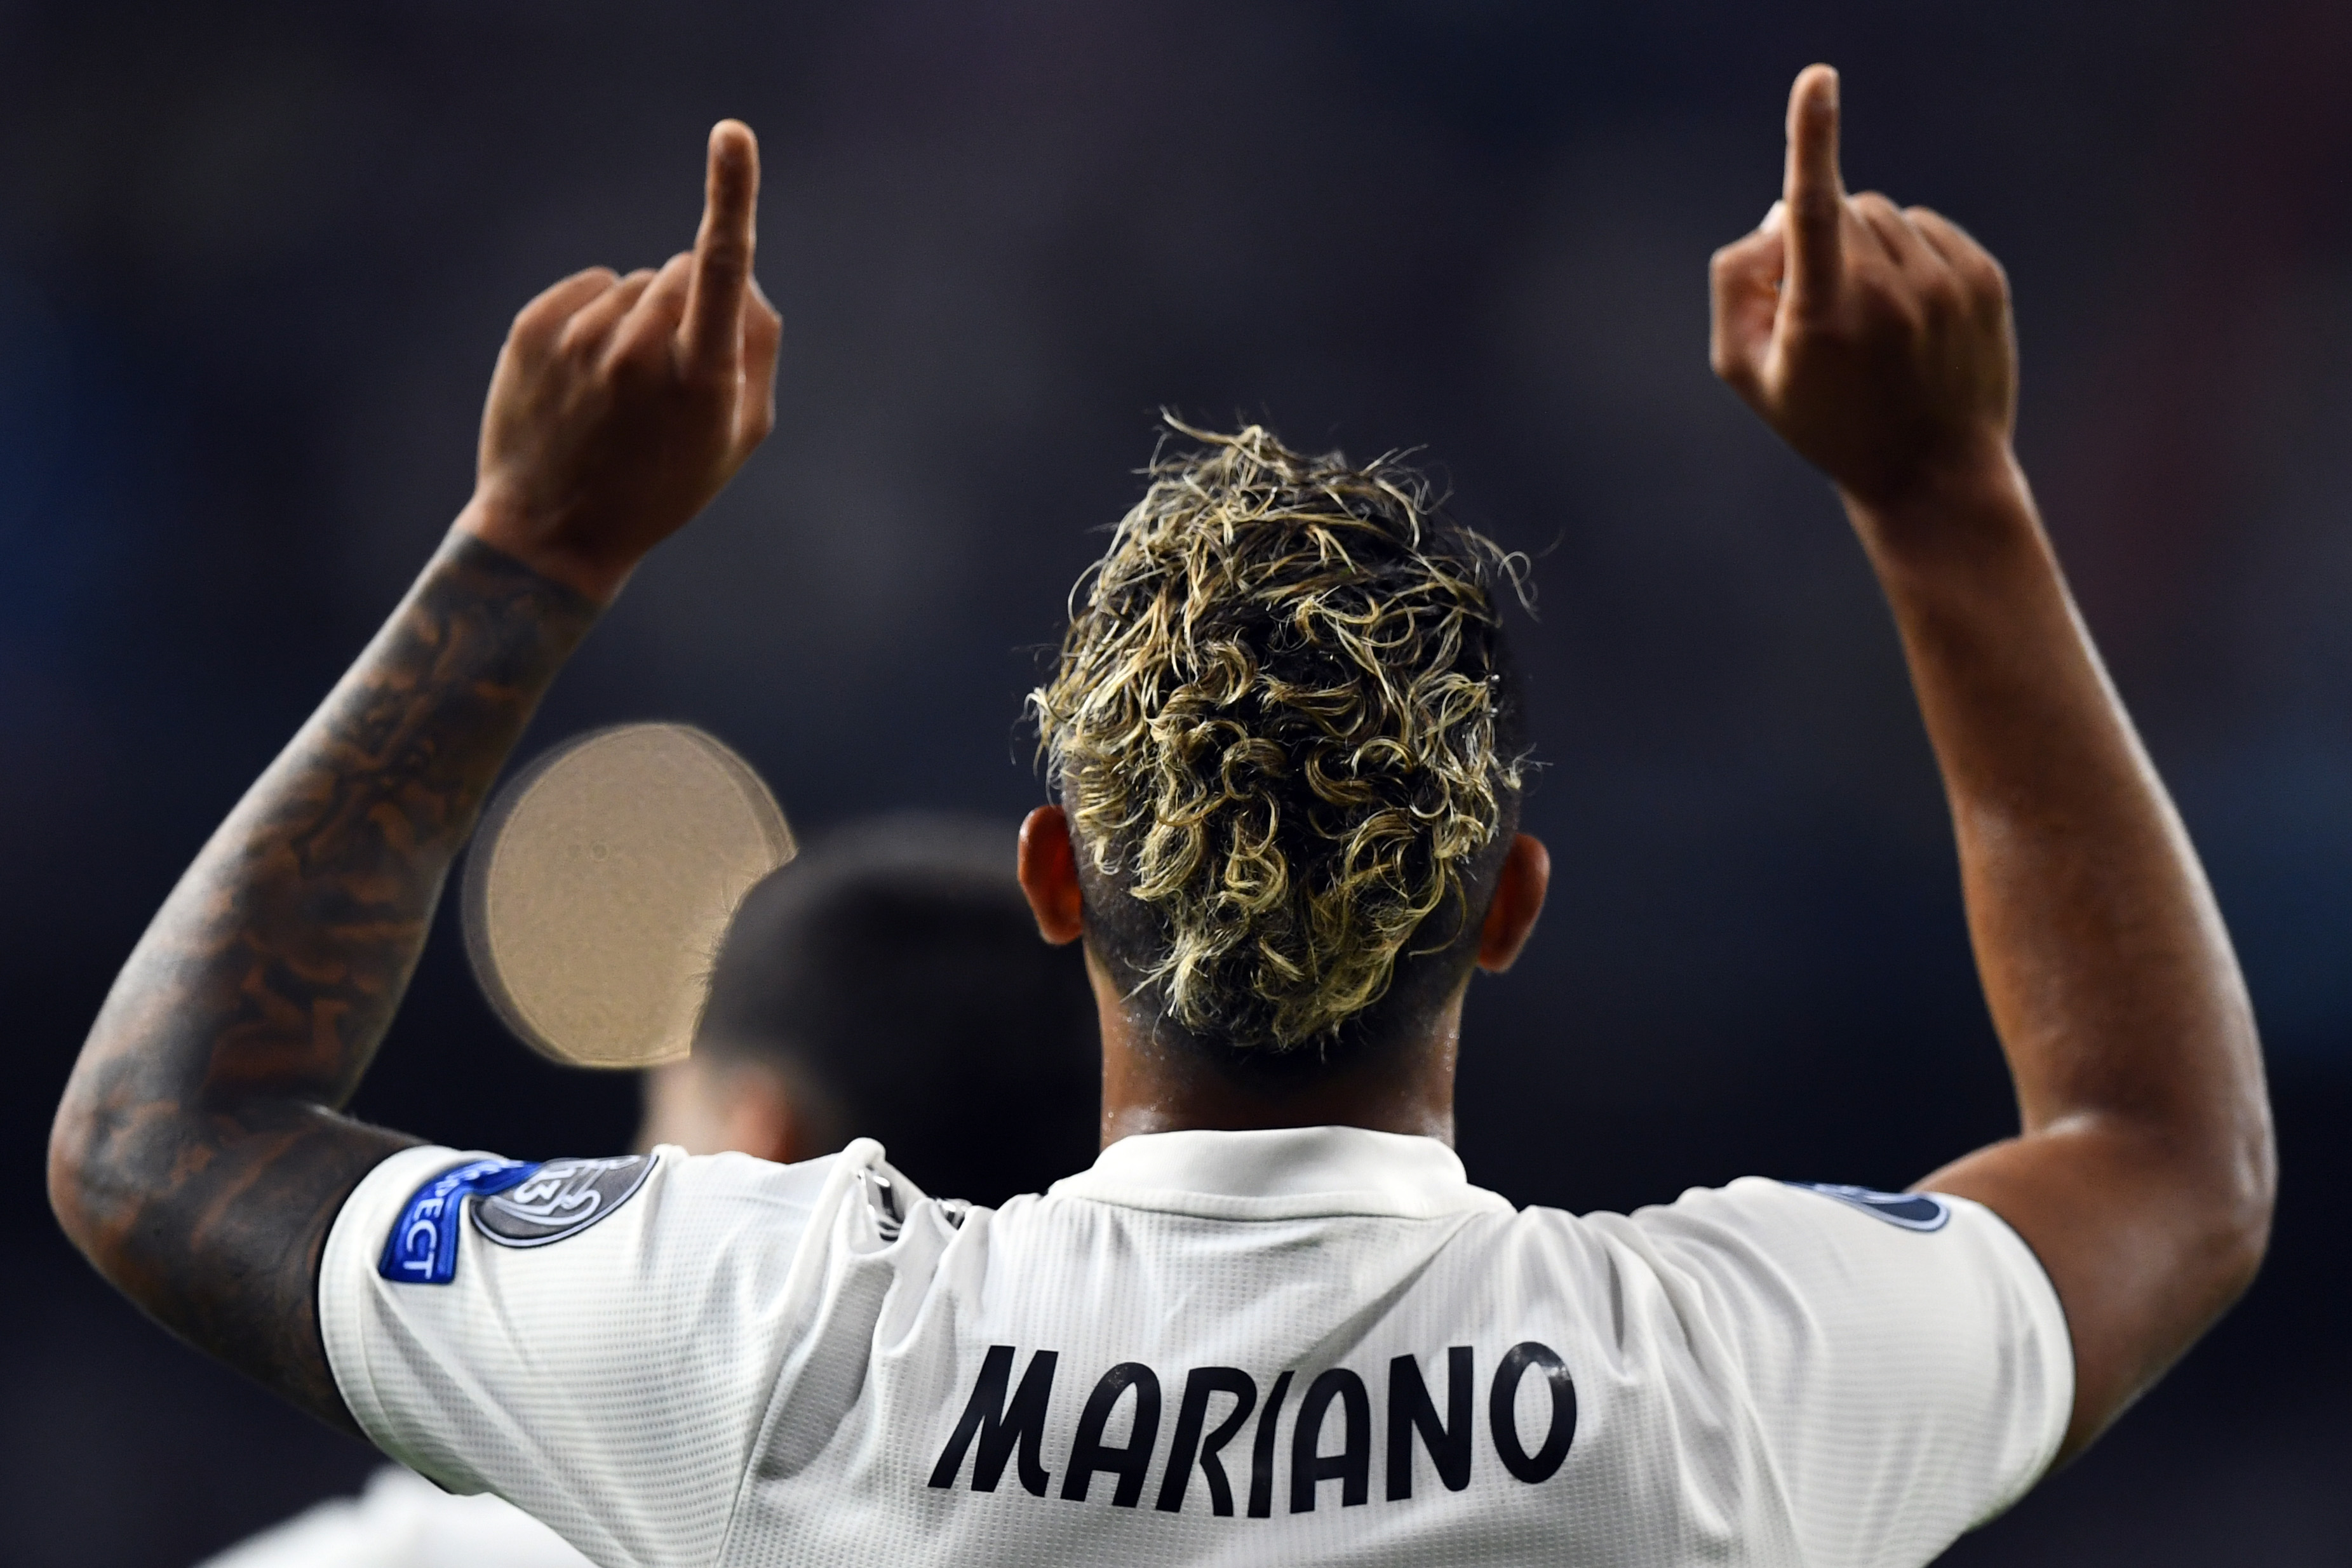 Real Madrid's Spanish-Dominican forward Mariano celebrates his goal during the UEFA Champions League group G football match between Real Madrid CF and AS Roma at the Santiago Bernabeu stadium in Madrid on September 19, 2018. (Photo by GABRIEL BOUYS / AFP)        (Photo credit should read GABRIEL BOUYS/AFP/Getty Images)